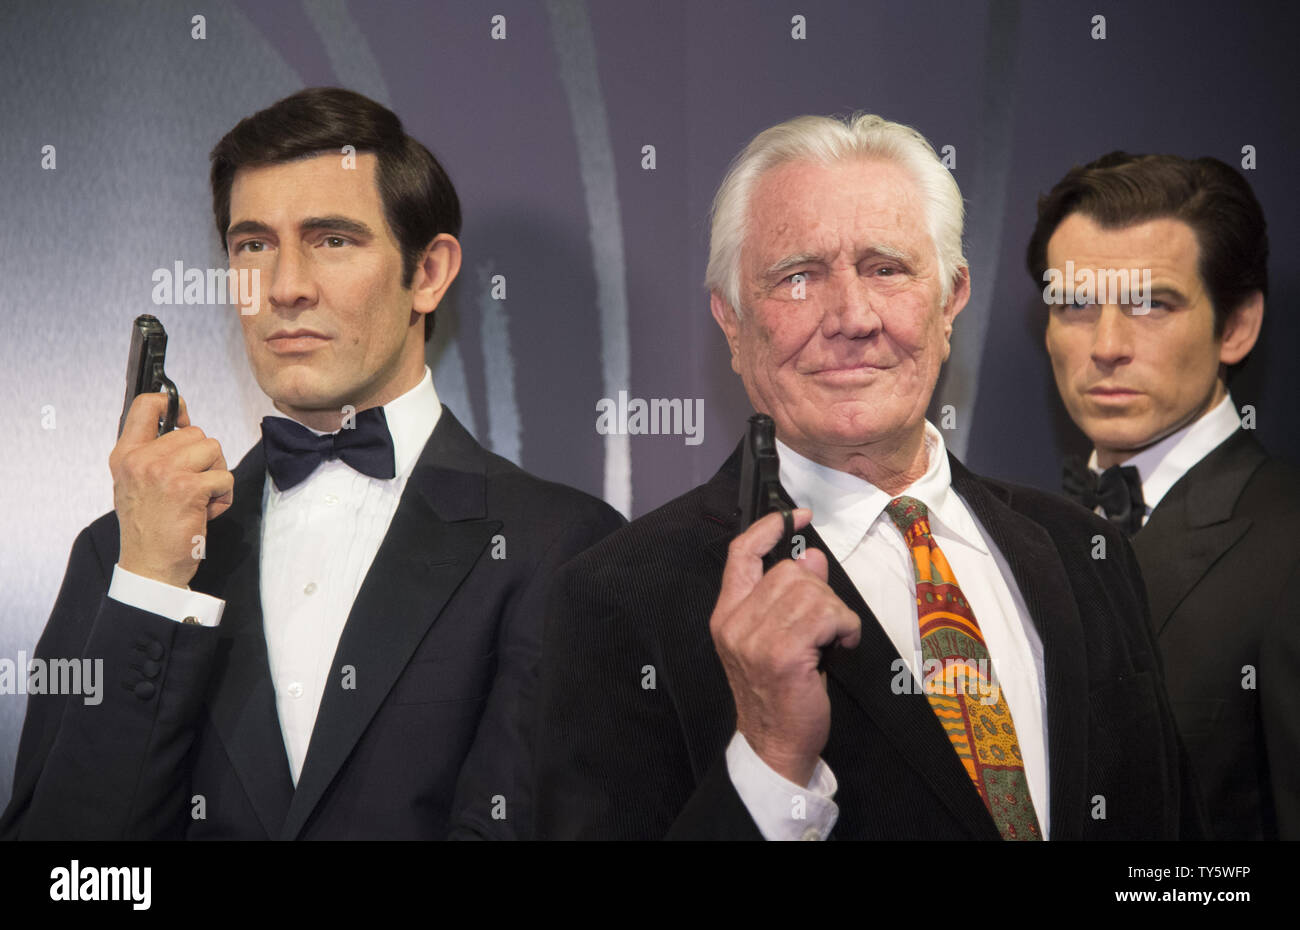 Actor George Lazenby participates in the unveiling of the Wax figures of all six James Bonds now displayed at Madame Tussauds Hollywood in the Hollywood section of Los Angeles on December 15, 2015. Lazenby portrayed Bond in 'On Her MajestyÕs Secret Service' in 1969. The figures represent actors Sean Connery, George Lazenby, Roger Moore, Timothy Dalton, Pierce Brosnan and Daniel Craig in their Bond roles.     Photo by Phil McCarten/UPI Stock Photo